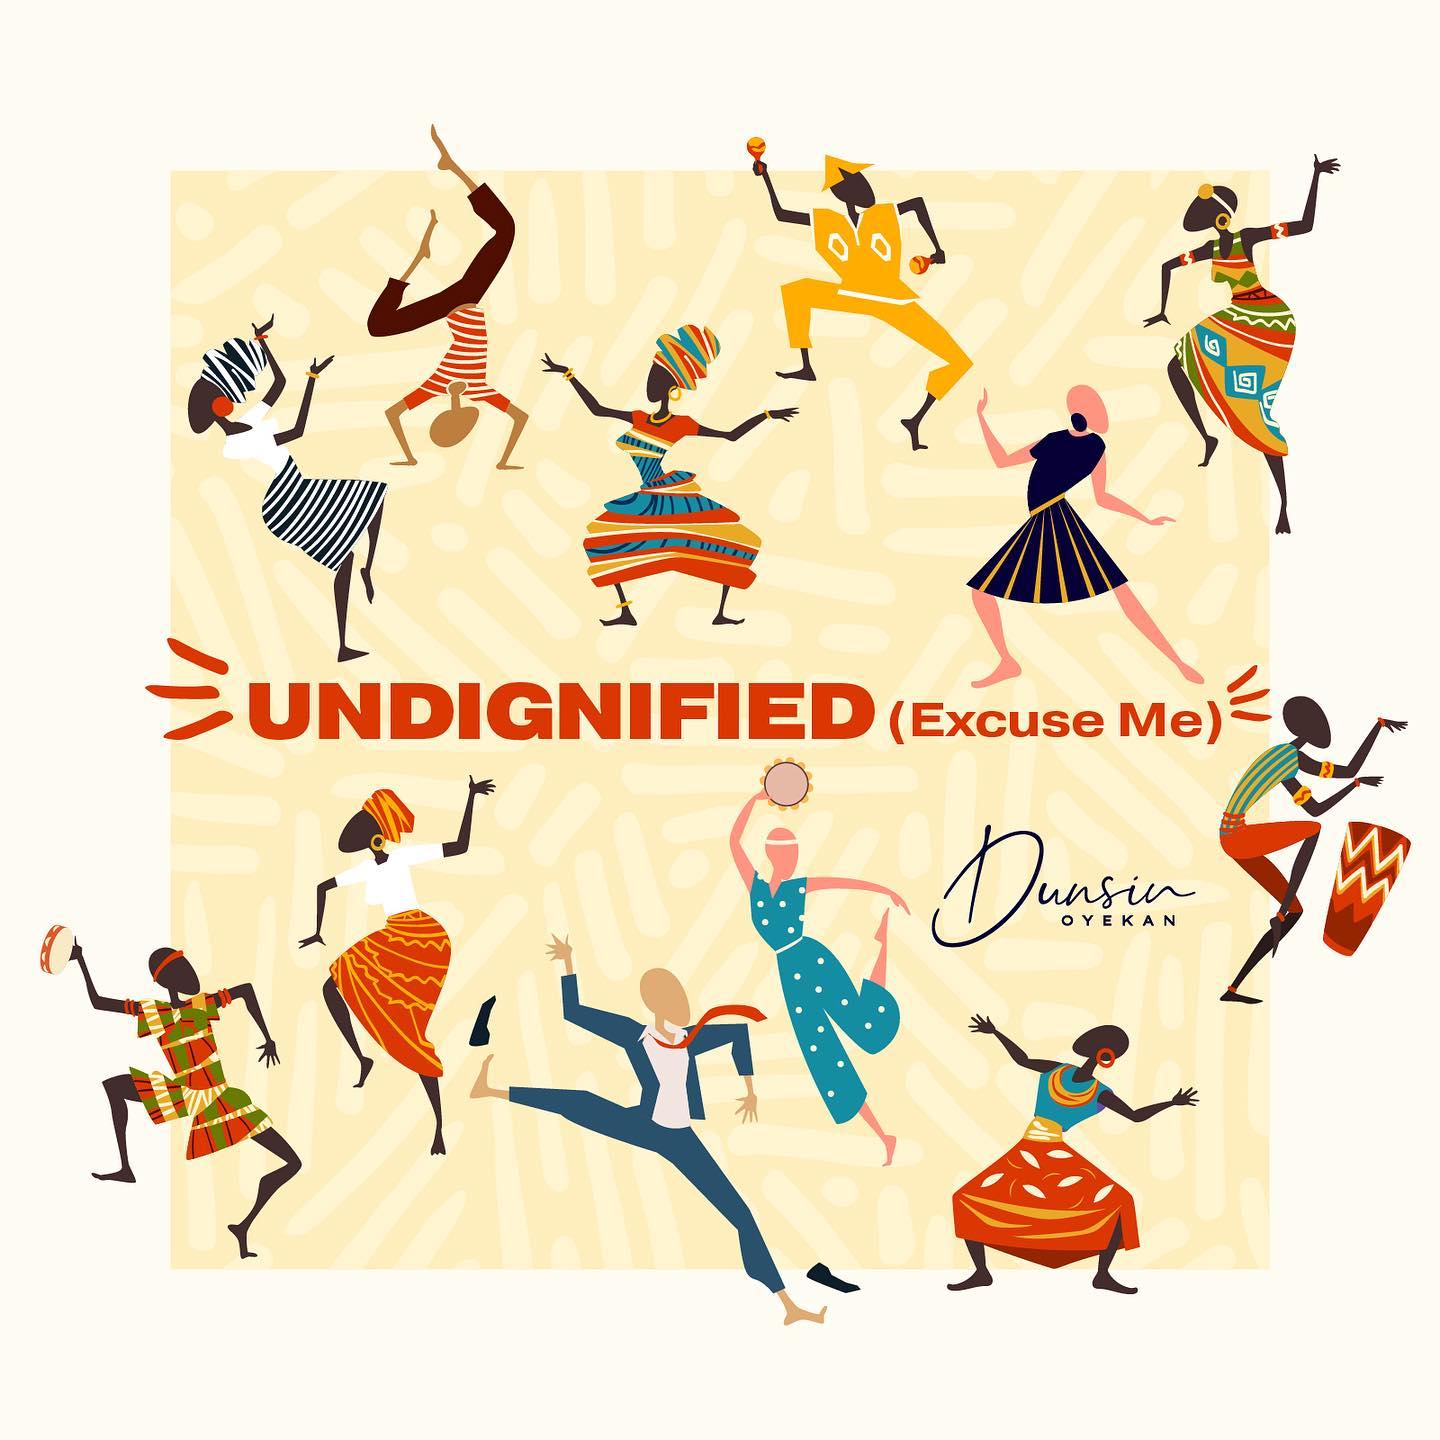 New Music + Video- Dunsin Oyekan – Undignified (Excuse Me)